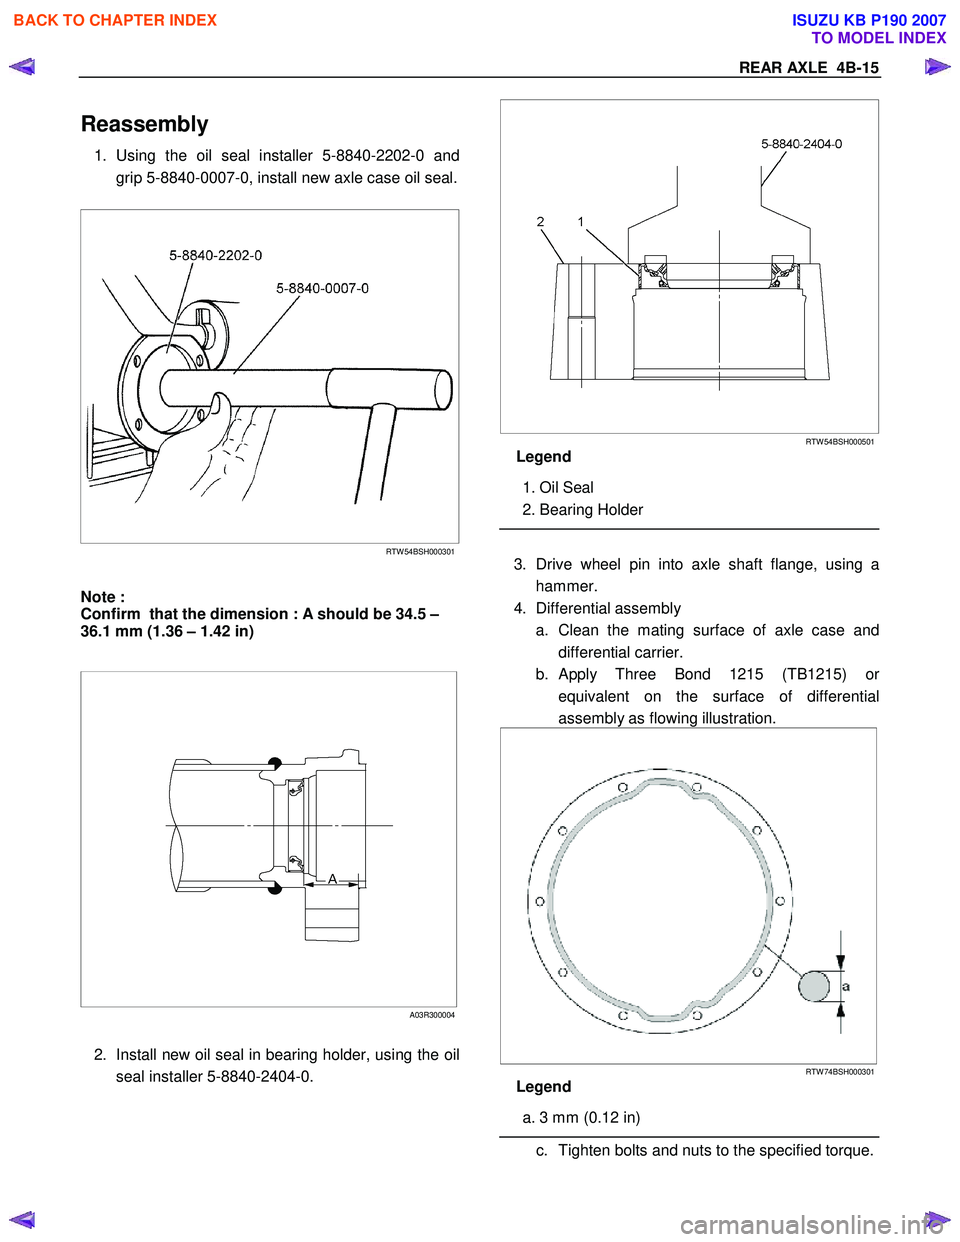 ISUZU KB P190 2007  Workshop User Guide REAR AXLE  4B-15 
Reassembly 
1. Using the oil seal installer 5-8840-2202-0 and 
grip 5-8840-0007-0, install new axle case oil seal.
 
   
 
 
RTW 54BSH000301
  
Note :  
Confirm  that the dimension :